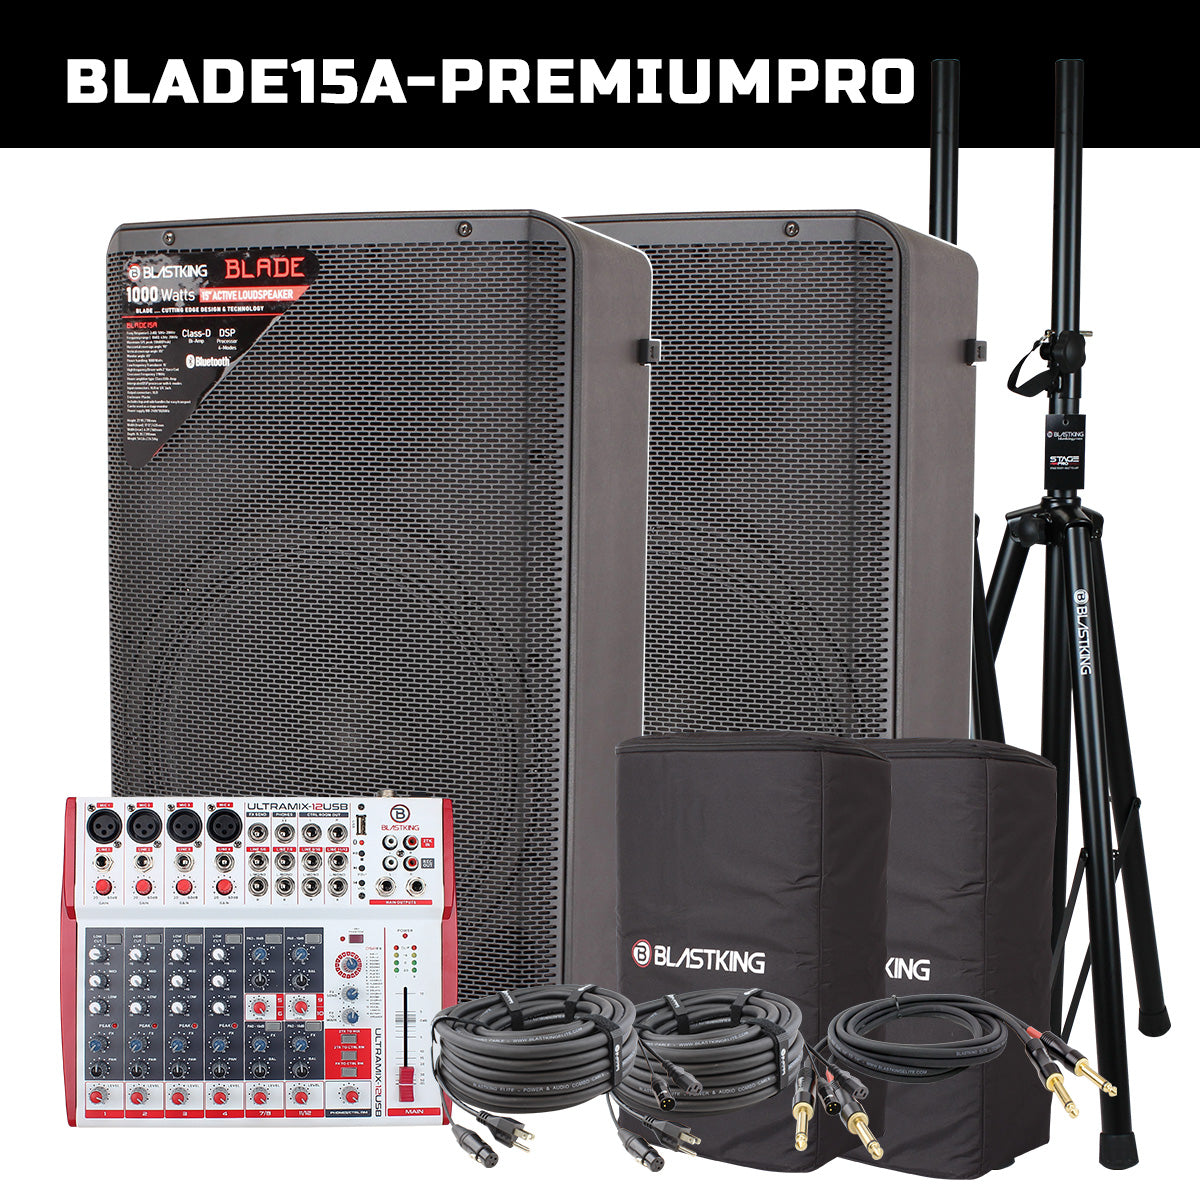 Blastking BLADE15A-PREMIUMPRO (2) 15” Active Loudspeakers 1000 Watts Class-D with DSP Processor with 12 Channel Analog Mixing Console, Stands, Cables and Bags